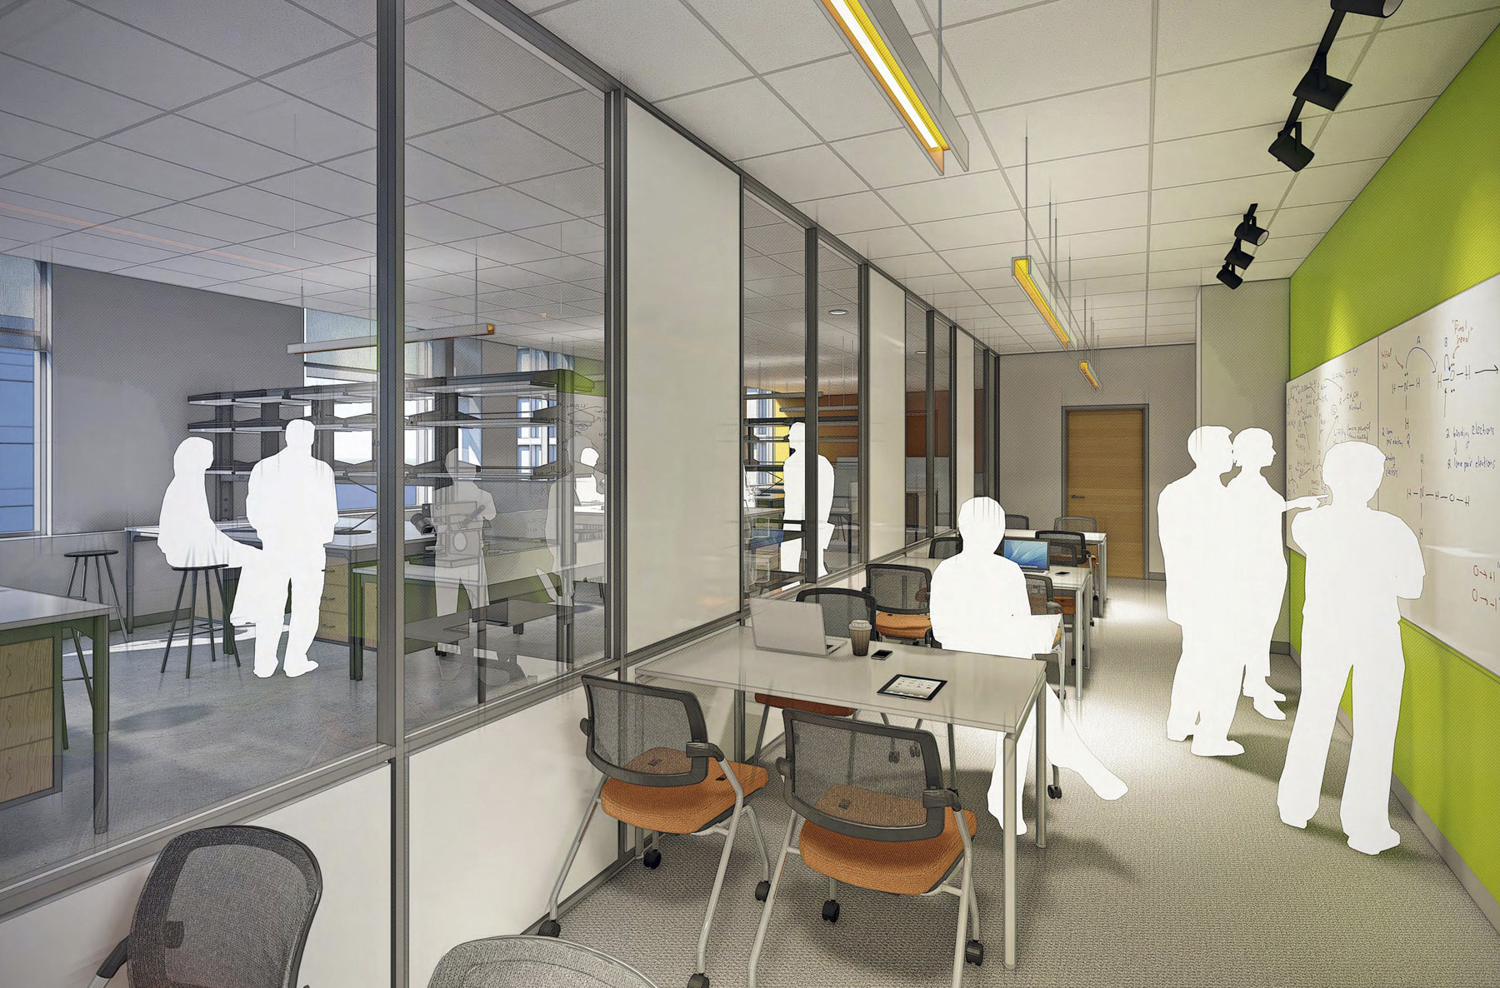 San Jose State University Interdisciplinary Science Building lab and classroom, rendering by Flad